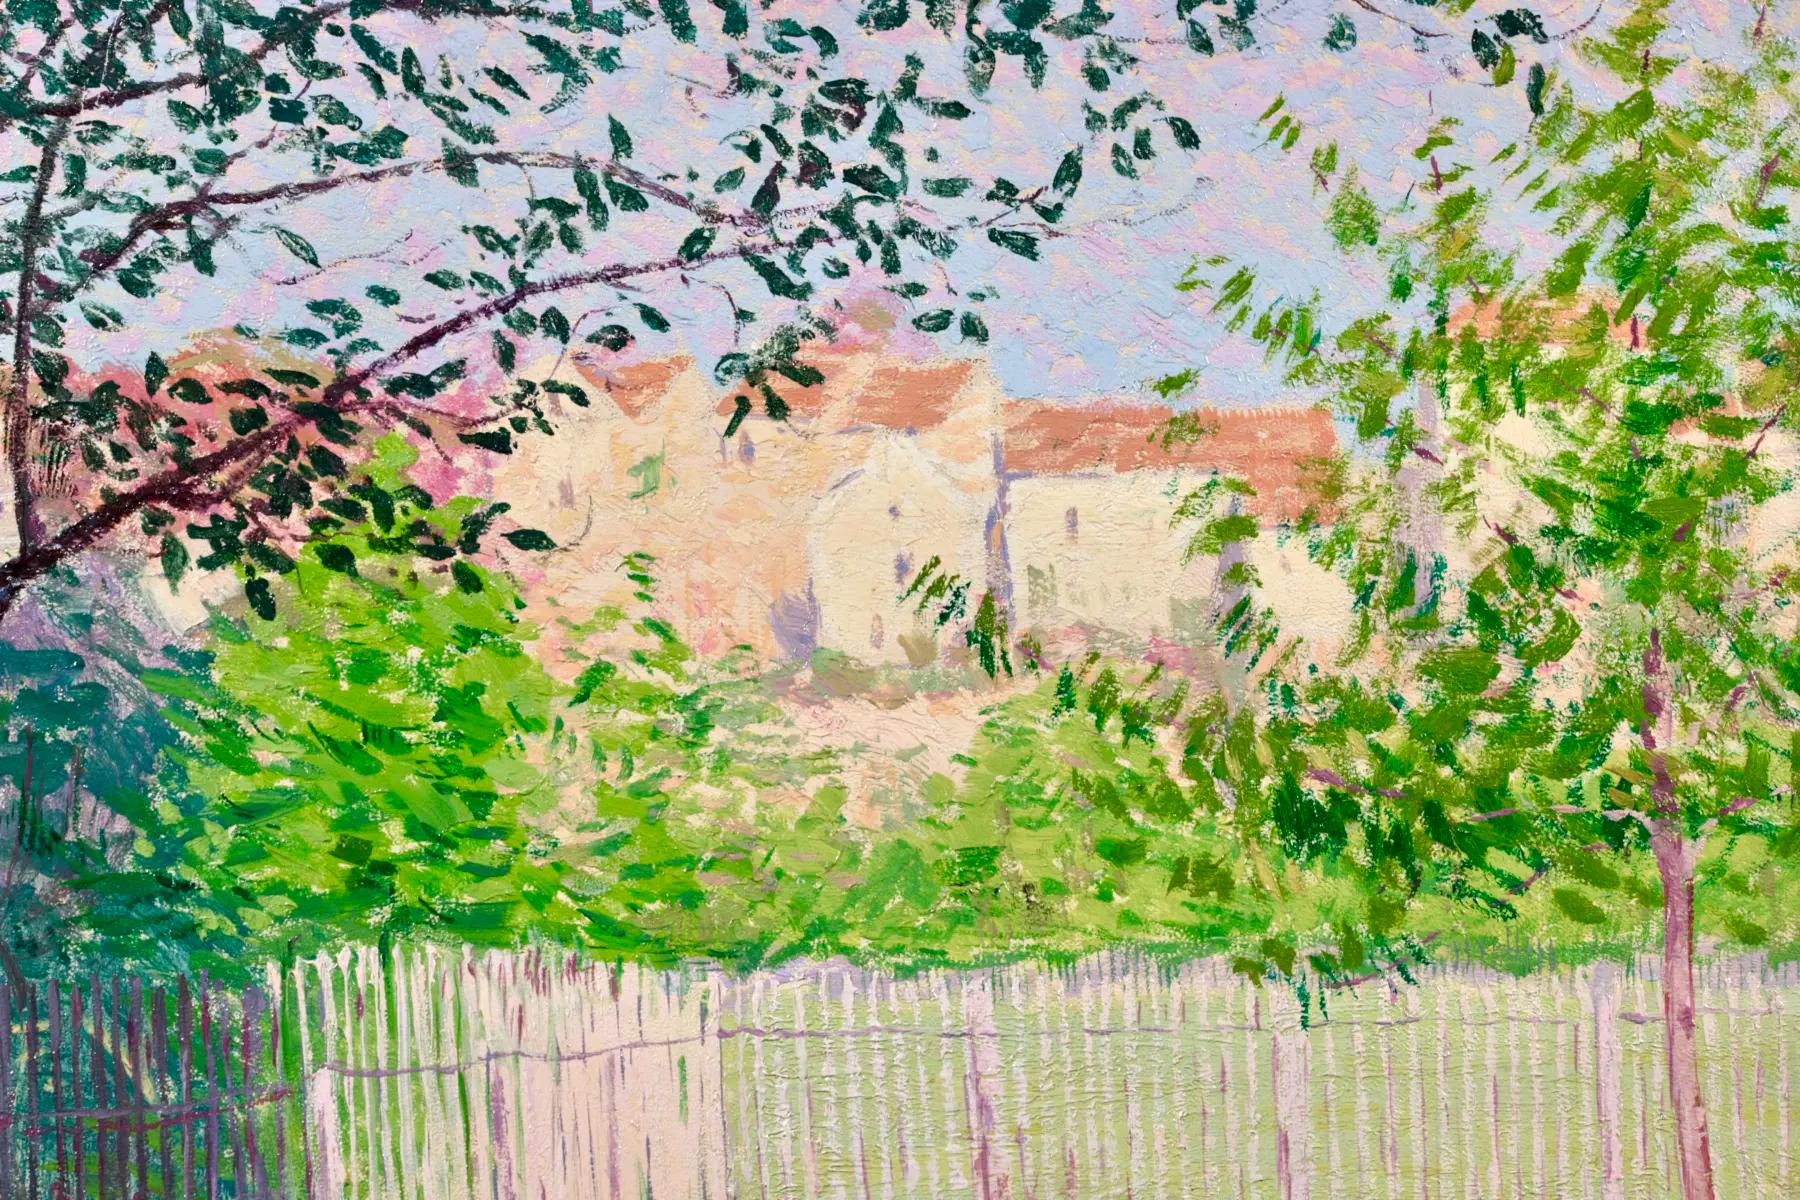 Signed impressionist oil on panel landscape circa 1900 by French painter Leon Giran-Max. The work depicts a view of fenced garden with pink flowers contrasting against the green foliage in the flower beds. Beyond the fence the houses of the town can